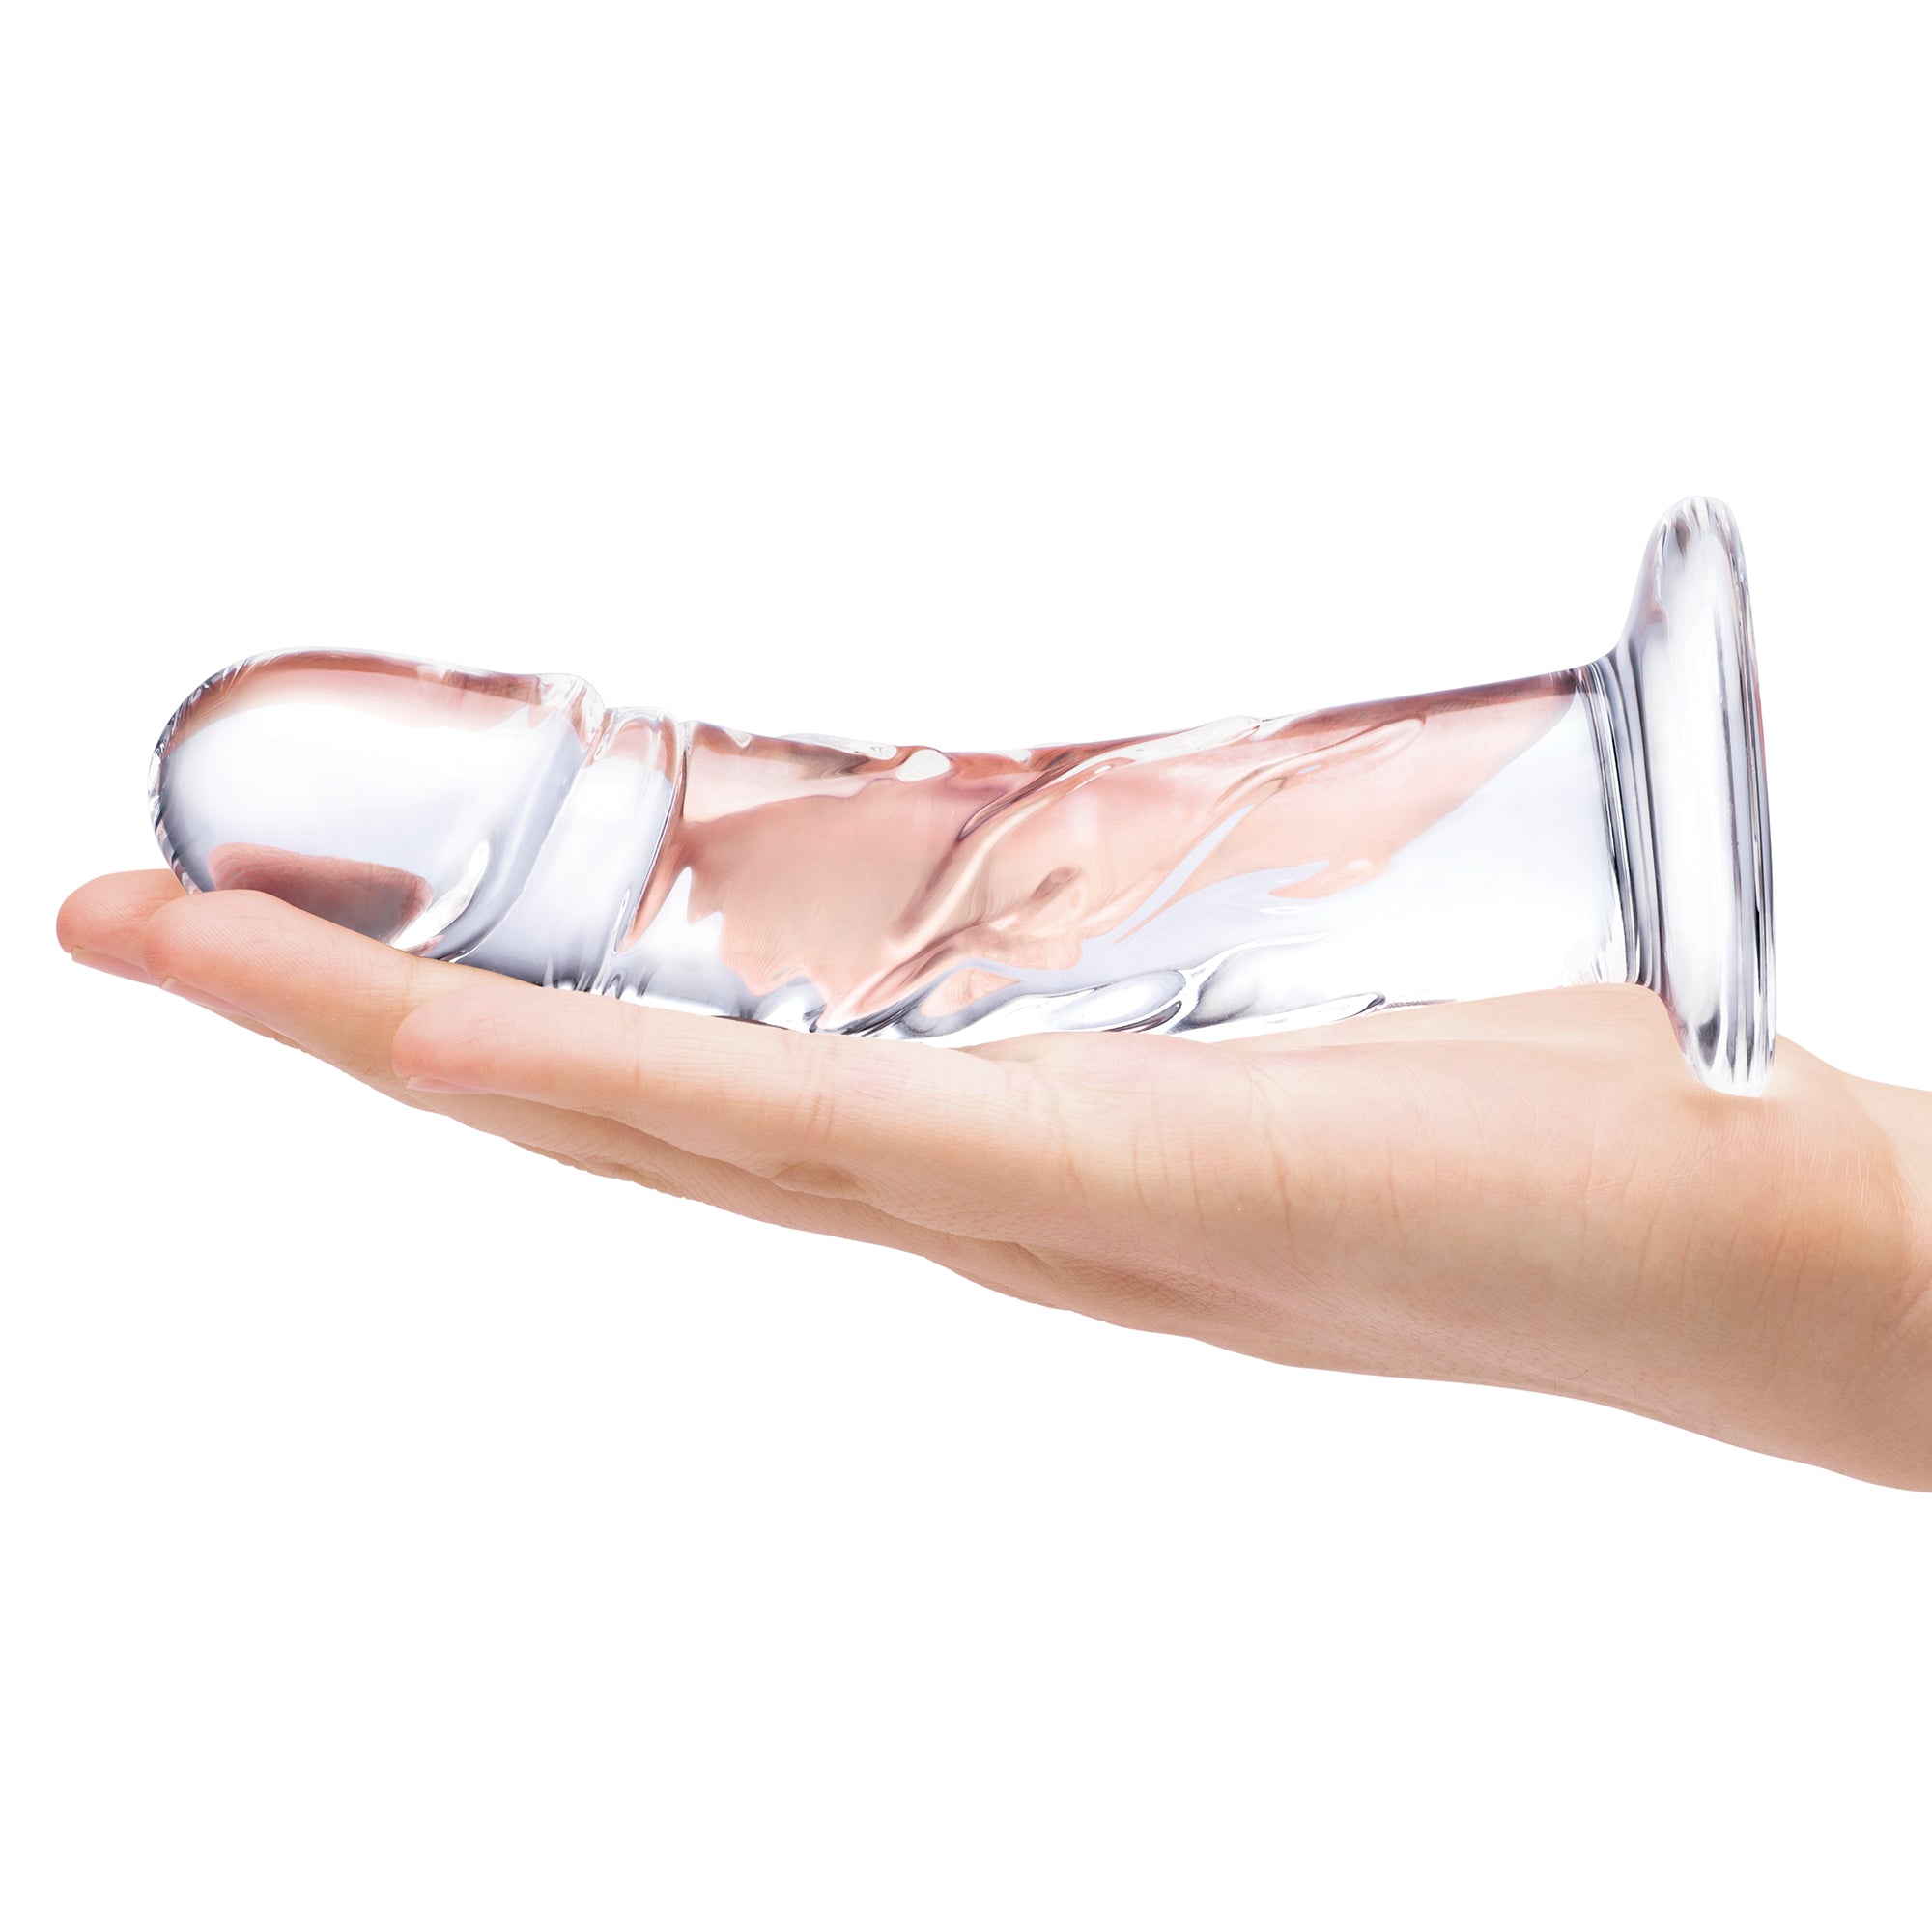 7" Curved Realistic Glass Dildo With Veins